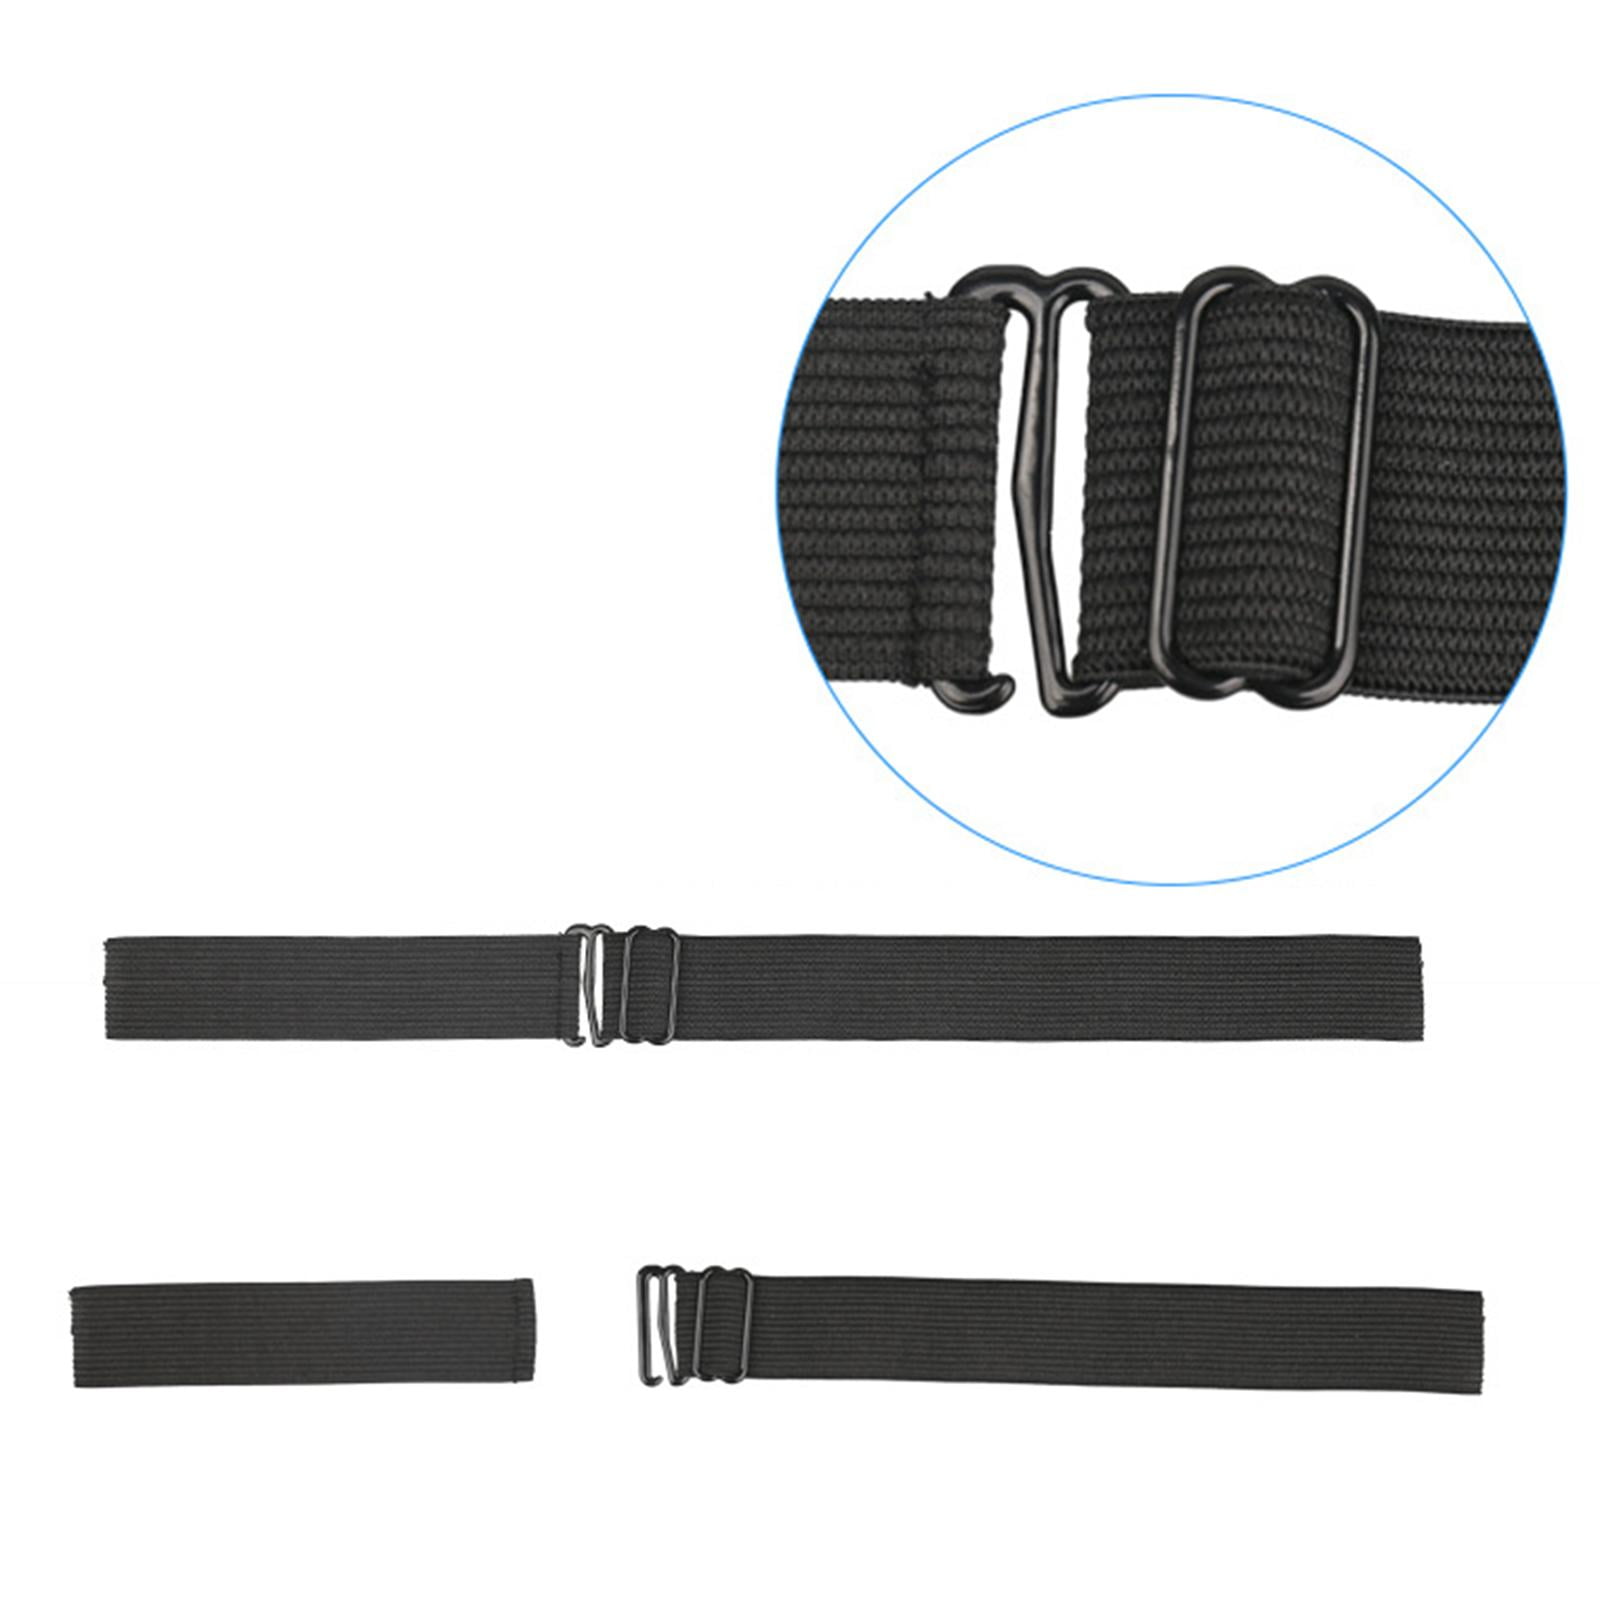 5 Pieces Black Adjustable Elastic Band Straps with Hooks for